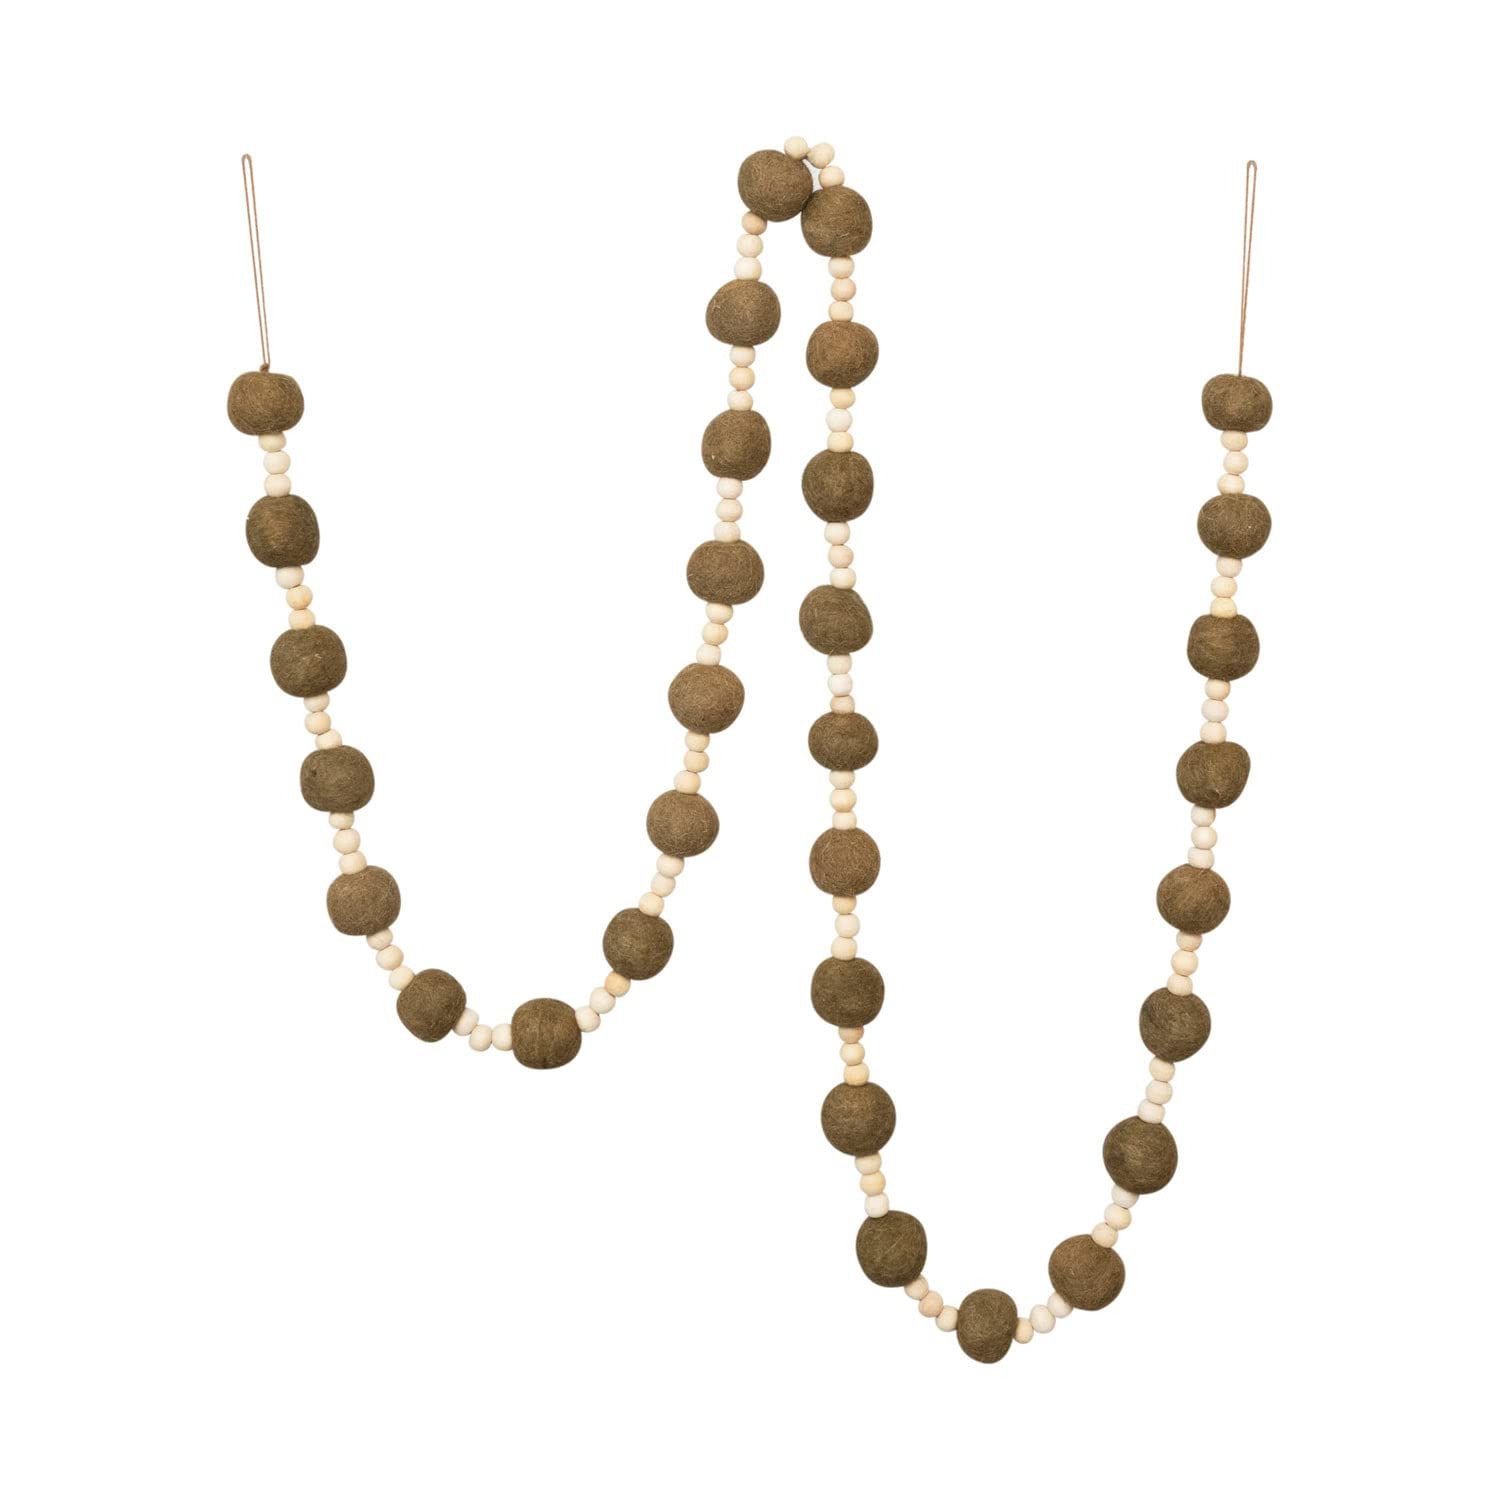 Creative Co-Op Wool Felt Ball Garland with Wood Beads, Natural and Brown | Amazon (US)